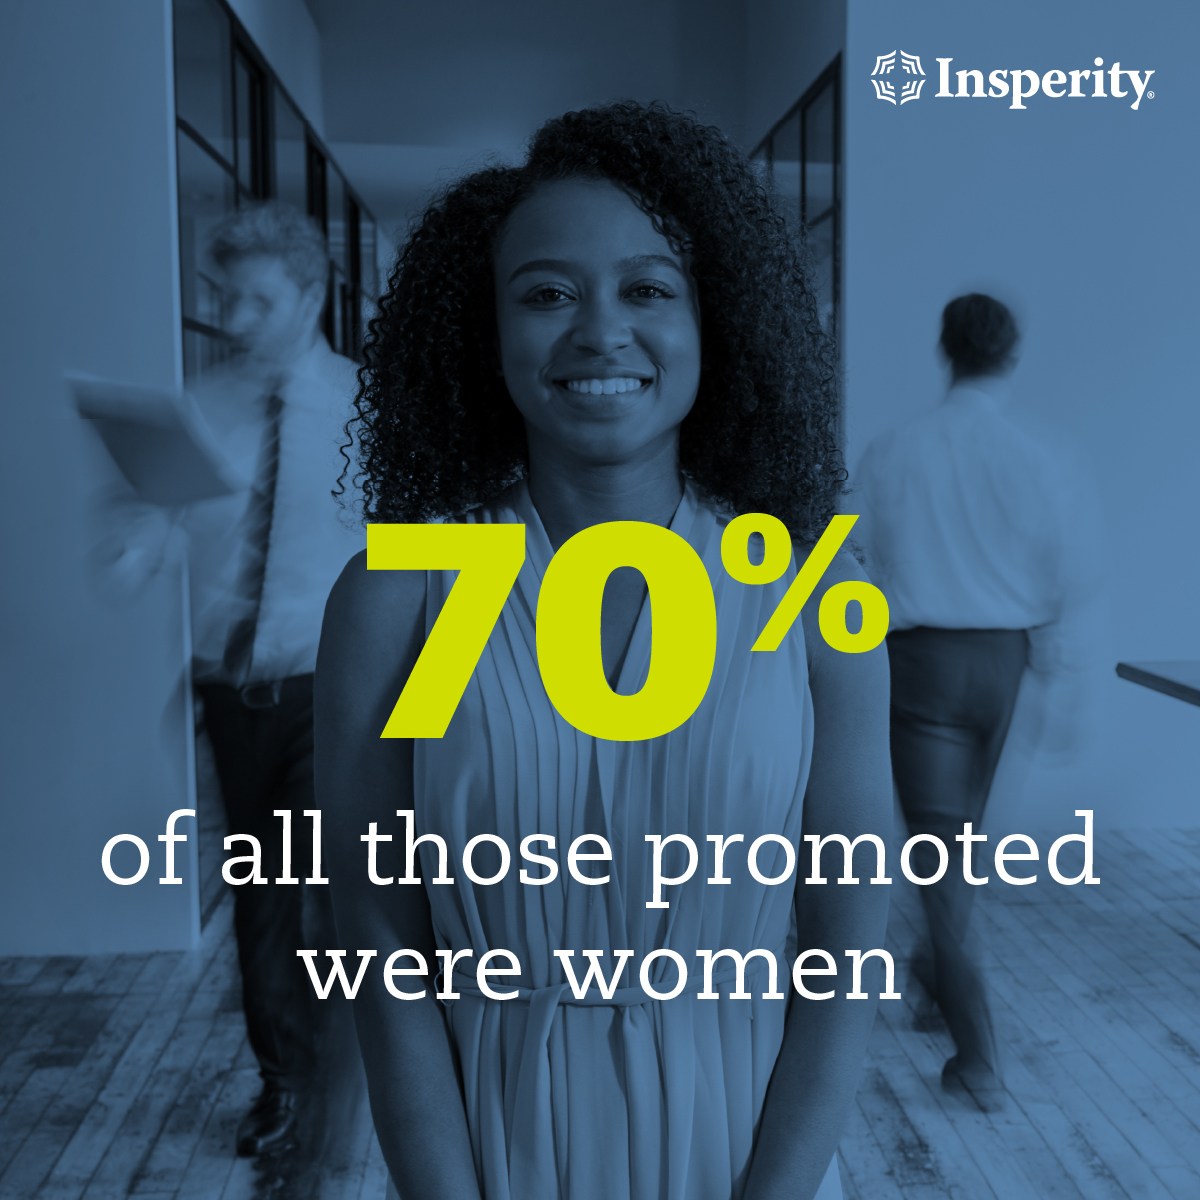 Our company culture fosters a supportive work environment. In '22, our dedication to our people empowered women to lead us toward successful business strategies.

See our full report 👉 bit.ly/3PlHlyS

#InsperityCSR #HRThatMakesaDifference